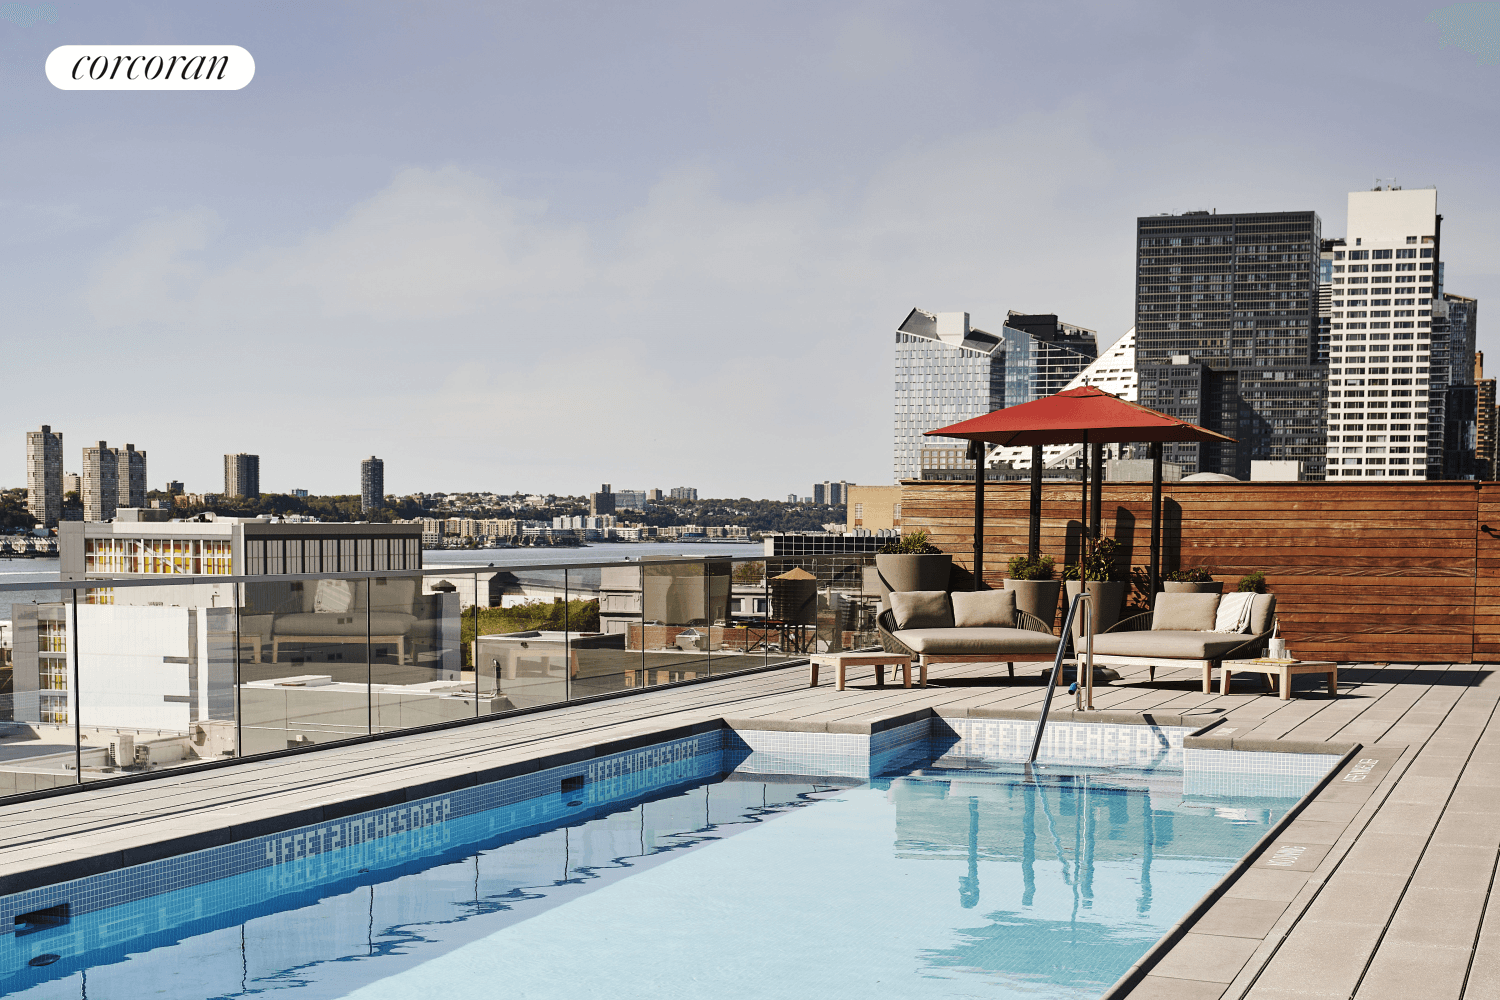 547 West 47th Street, 322The West Residence Club, Hell's Kitchen, New York, NY 10036547 West 47th Street offers lifestyle driven condominium residences with architecture and interiors by the innovative Dutch ...